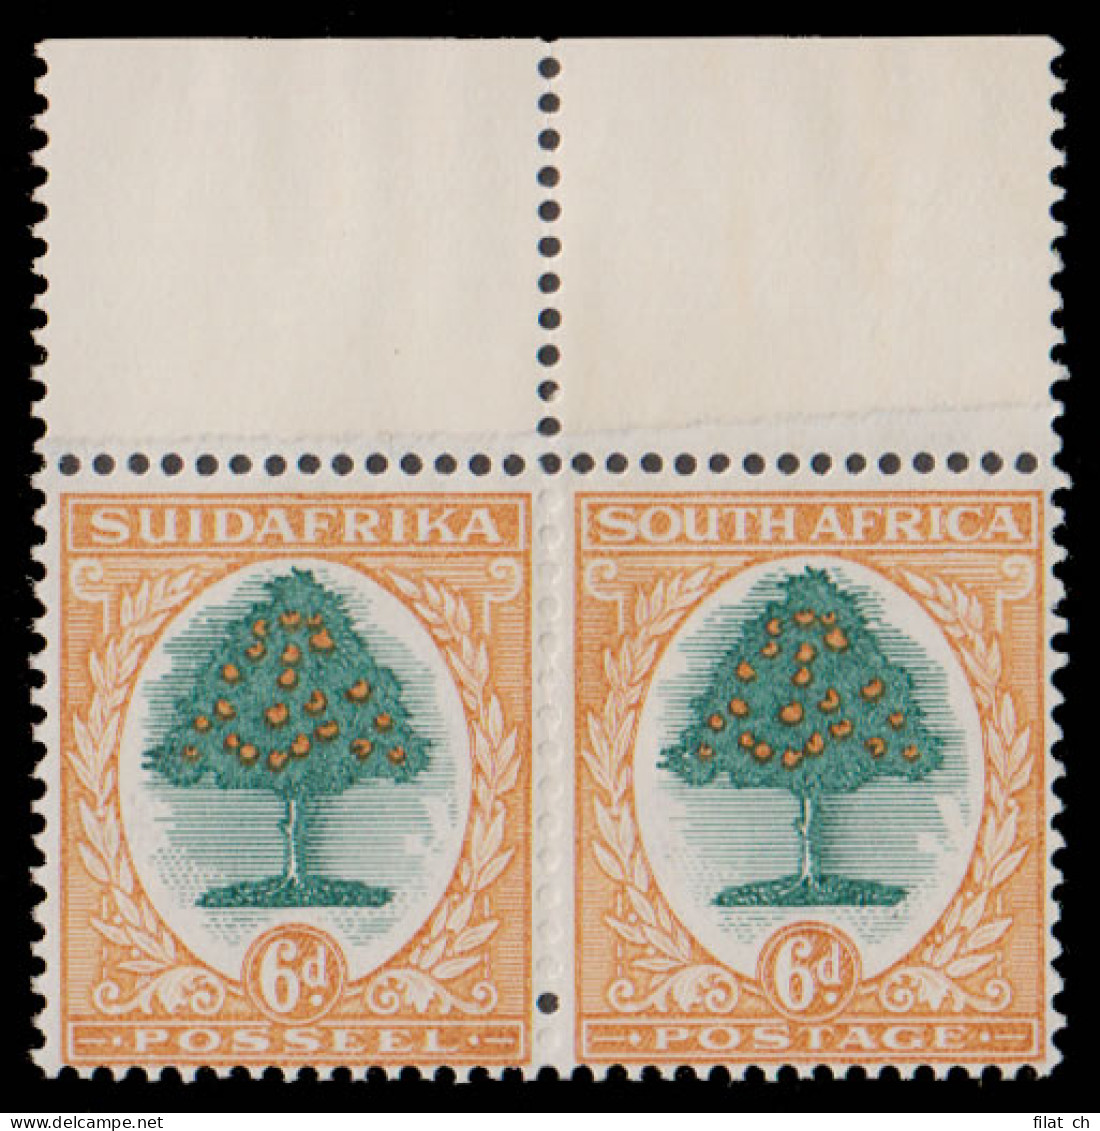 South Africa 1931 6d Roto Paper Join Pair, Rare - Unclassified